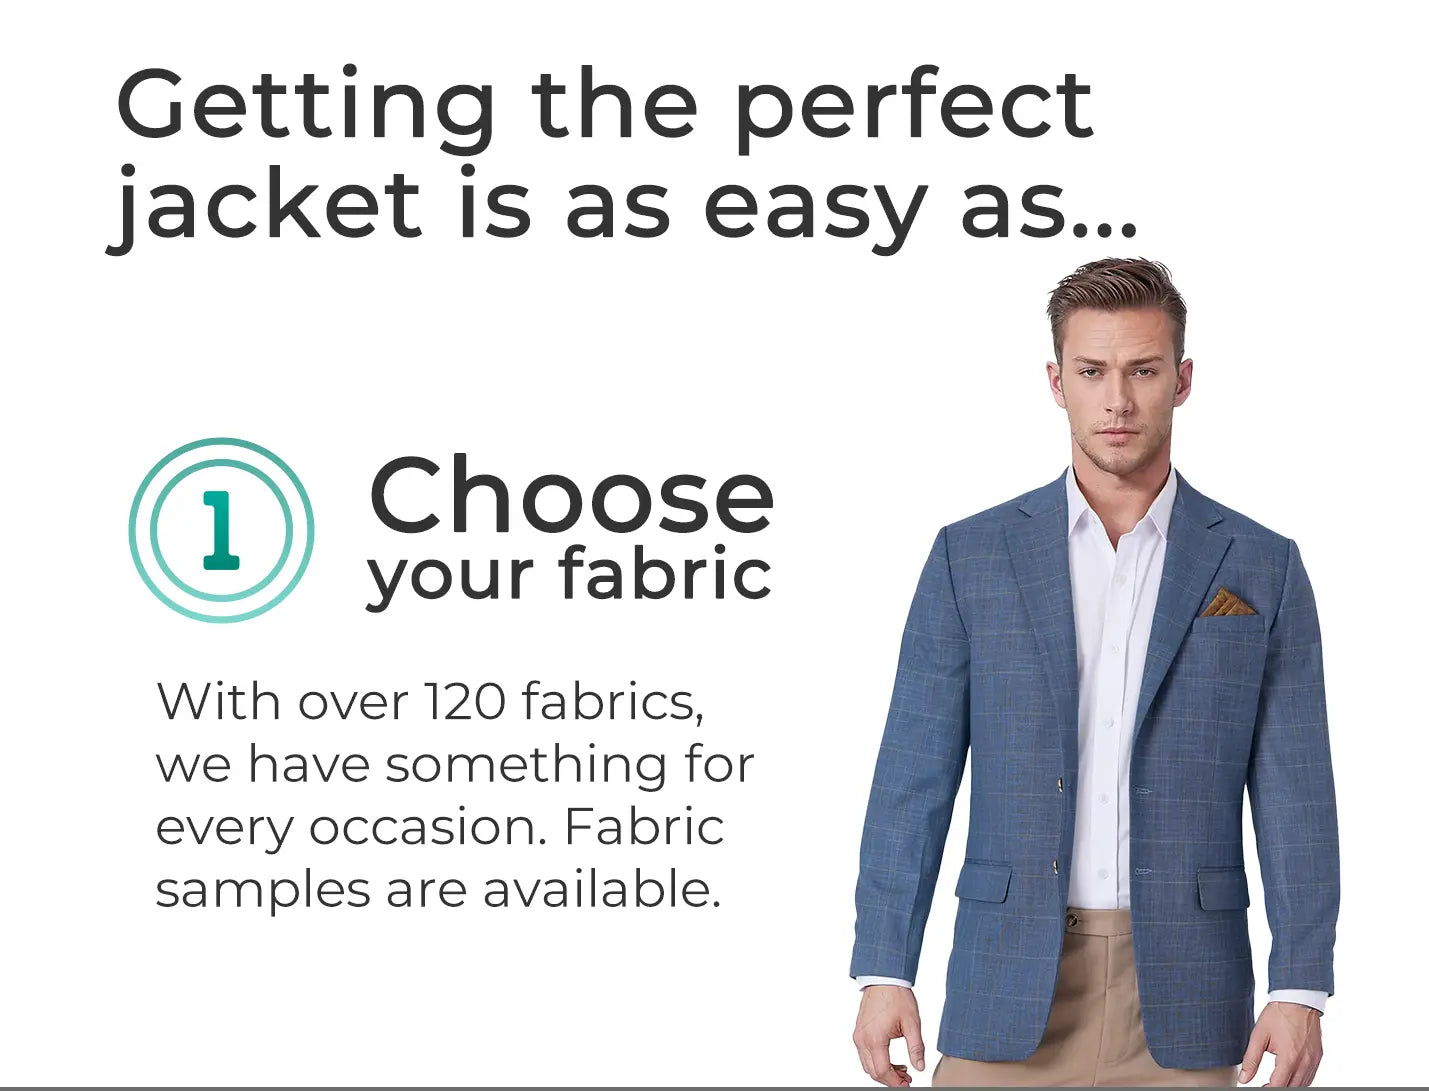 Get the perfect jacket in three steps... choose your fabric. With over 120 fabrics, we have something for every occasion. Fabric samples are available. Man in blue jacket.